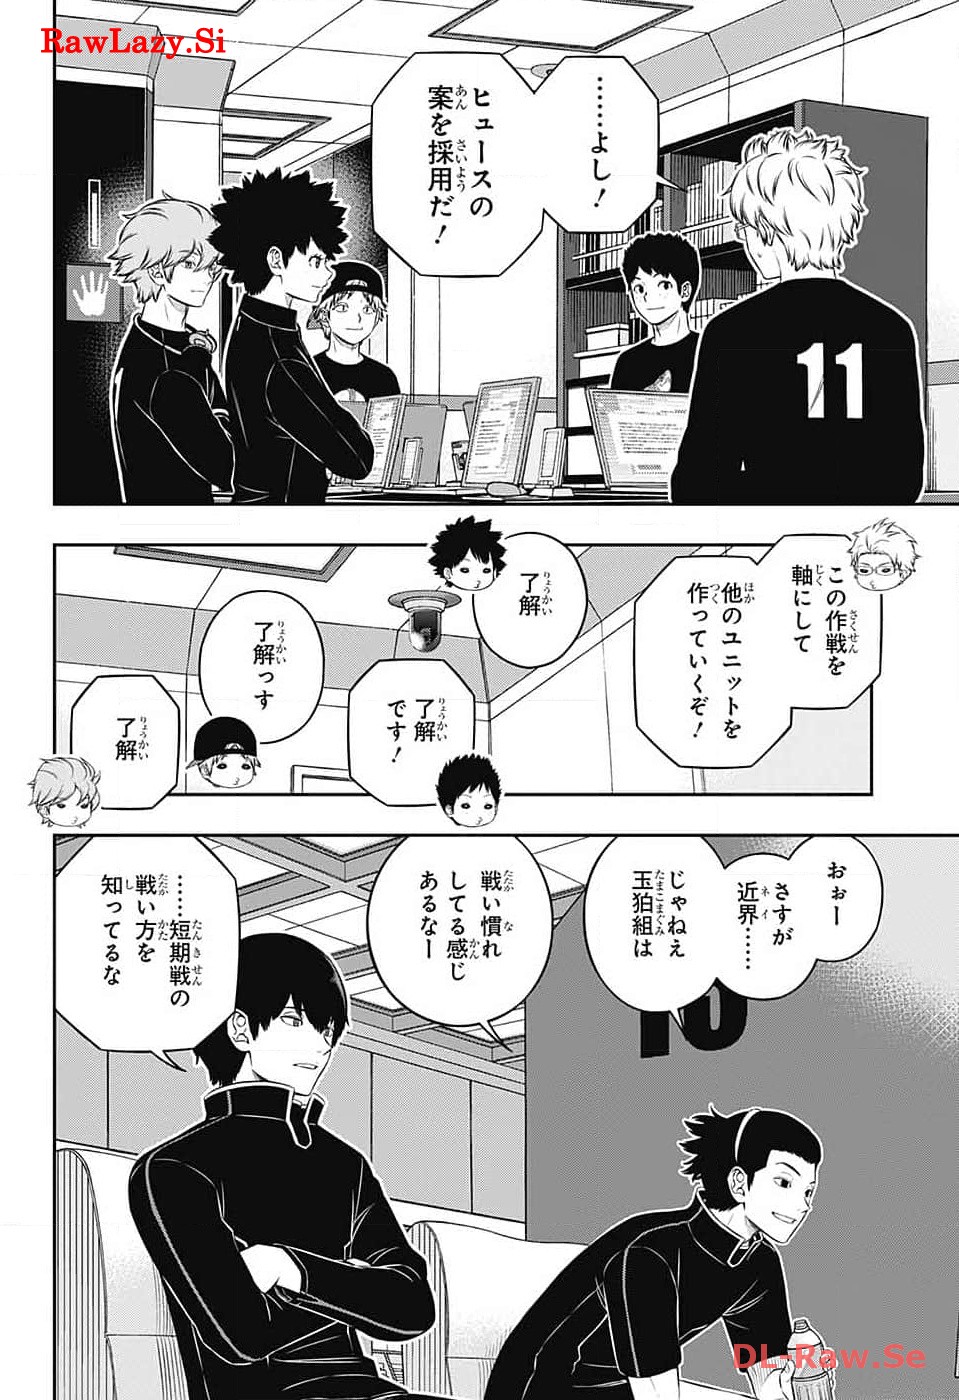 World Trigger - Chapter 239 - Page 36